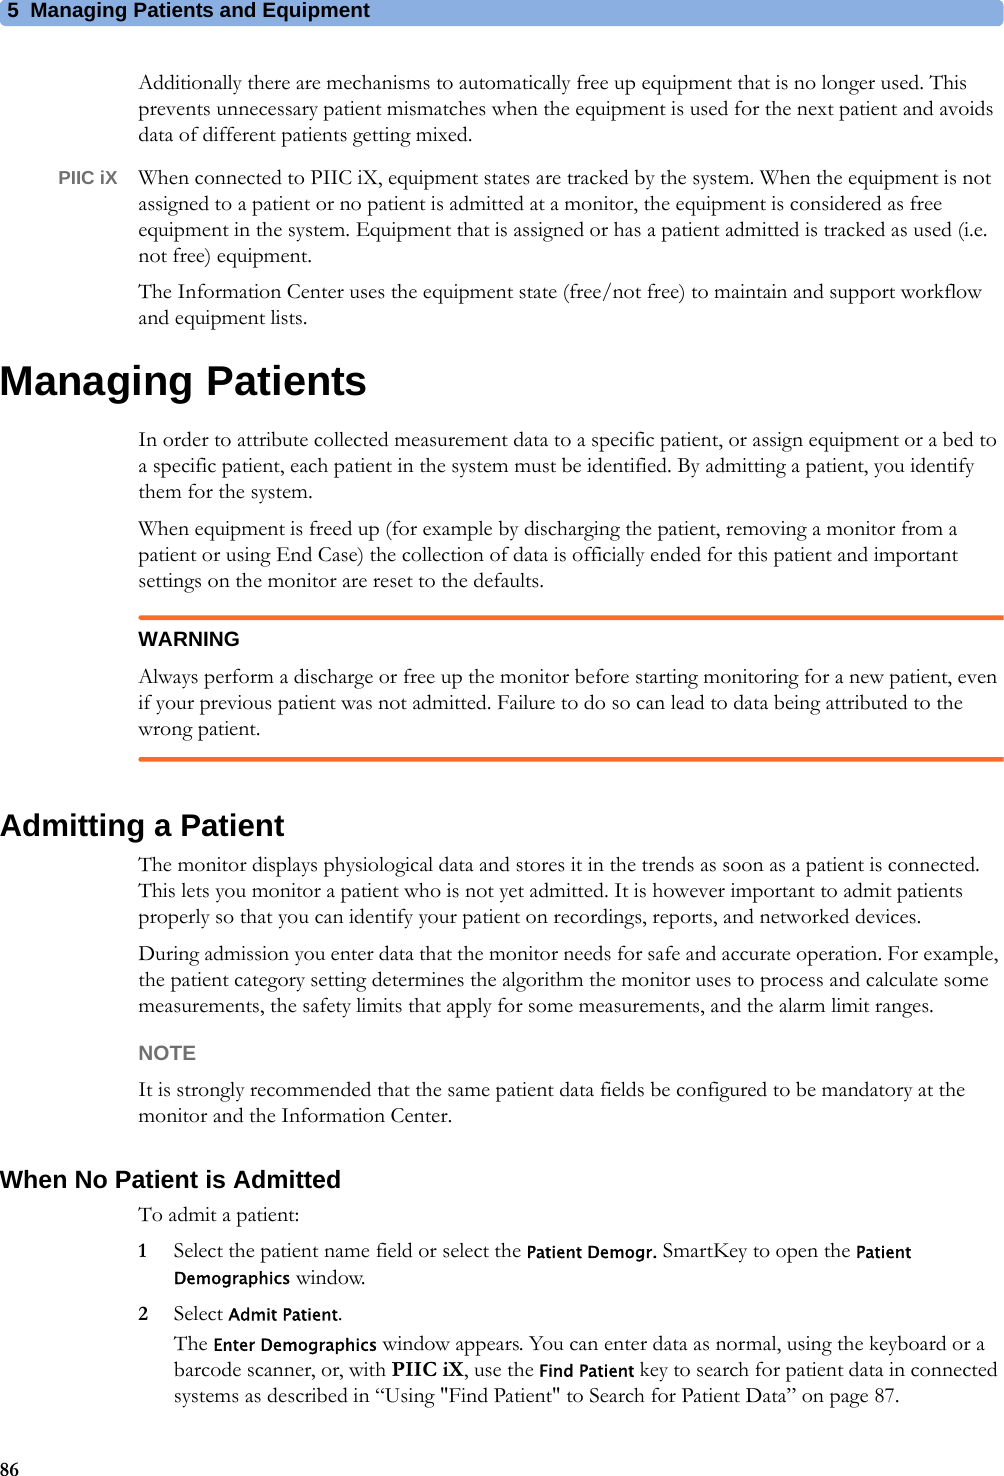 5 Managing Patients and Equipment86Additionally there are mechanisms to automatically free up equipment that is no longer used. This prevents unnecessary patient mismatches when the equipment is used for the next patient and avoids data of different patients getting mixed.PIIC iX When connected to PIIC iX, equipment states are tracked by the system. When the equipment is not assigned to a patient or no patient is admitted at a monitor, the equipment is considered as free equipment in the system. Equipment that is assigned or has a patient admitted is tracked as used (i.e. not free) equipment.The Information Center uses the equipment state (free/not free) to maintain and support workflow and equipment lists.Managing PatientsIn order to attribute collected measurement data to a specific patient, or assign equipment or a bed to a specific patient, each patient in the system must be identified. By admitting a patient, you identify them for the system.When equipment is freed up (for example by discharging the patient, removing a monitor from a patient or using End Case) the collection of data is officially ended for this patient and important settings on the monitor are reset to the defaults.WARNINGAlways perform a discharge or free up the monitor before starting monitoring for a new patient, even if your previous patient was not admitted. Failure to do so can lead to data being attributed to the wrong patient.Admitting a PatientThe monitor displays physiological data and stores it in the trends as soon as a patient is connected. This lets you monitor a patient who is not yet admitted. It is however important to admit patients properly so that you can identify your patient on recordings, reports, and networked devices.During admission you enter data that the monitor needs for safe and accurate operation. For example, the patient category setting determines the algorithm the monitor uses to process and calculate some measurements, the safety limits that apply for some measurements, and the alarm limit ranges.NOTEIt is strongly recommended that the same patient data fields be configured to be mandatory at the monitor and the Information Center.When No Patient is AdmittedTo admit a patient:1Select the patient name field or select the Patient Demogr. SmartKey to open the Patient Demographics window.2Select Admit Patient.The Enter Demographics window appears. You can enter data as normal, using the keyboard or a barcode scanner, or, with PIIC iX, use the Find Patient key to search for patient data in connected systems as described in “Using &quot;Find Patient&quot; to Search for Patient Data” on page 87. 